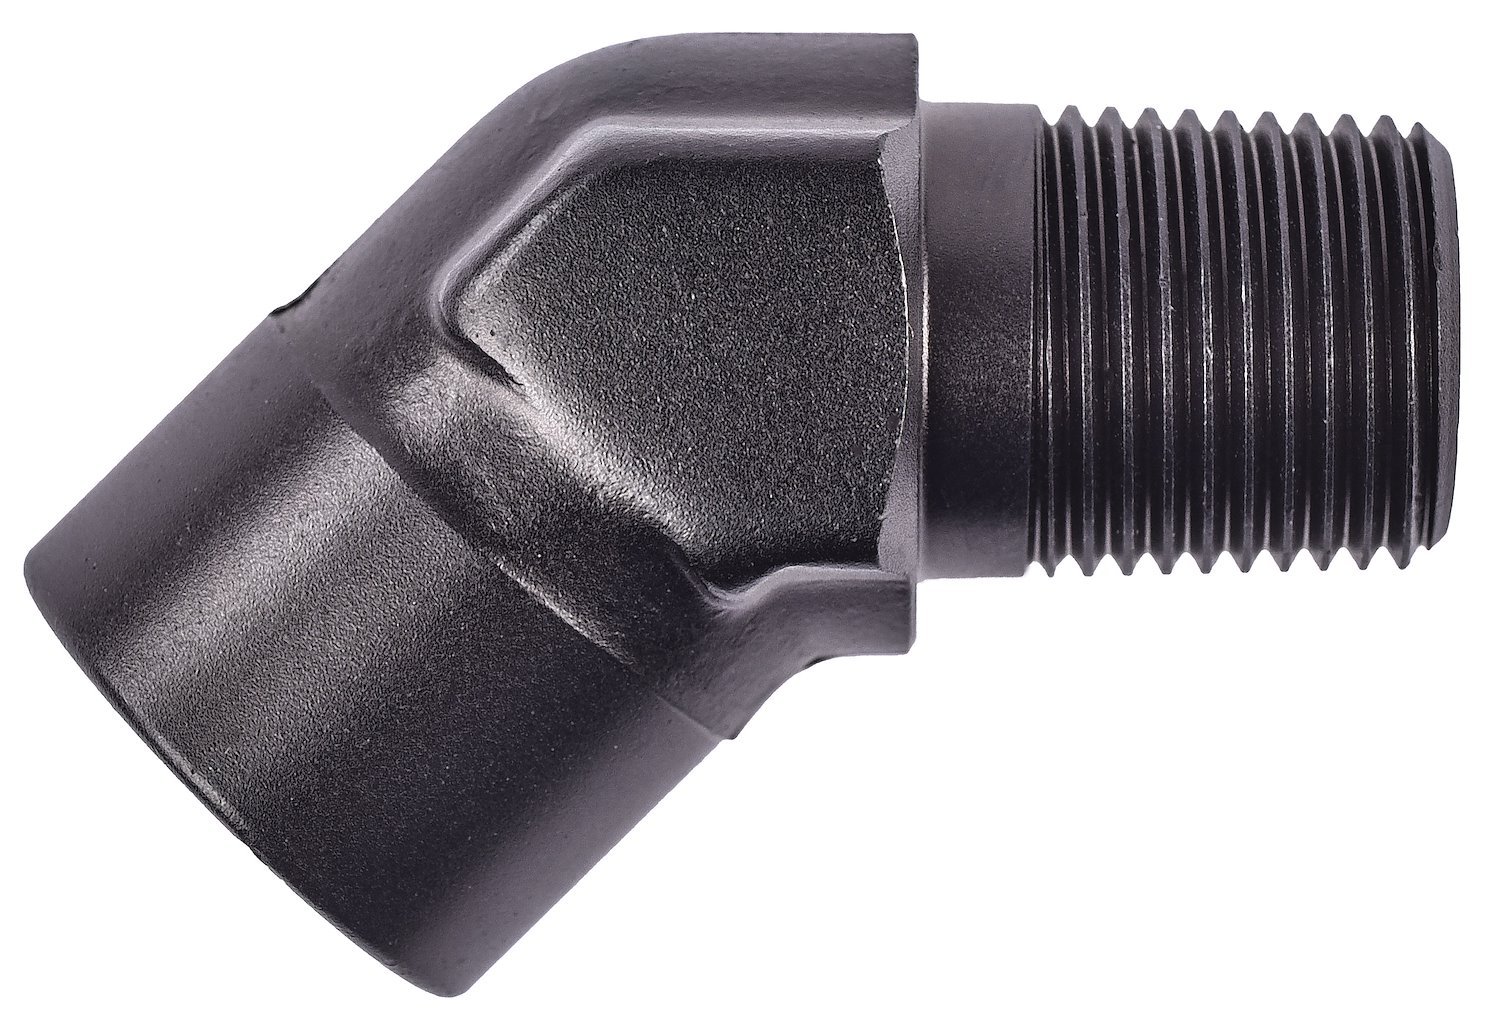 NPT to NPT 45-Degree Union Fitting [3/8 in. NPT Male to 3/8 in. NPT Female, Black]